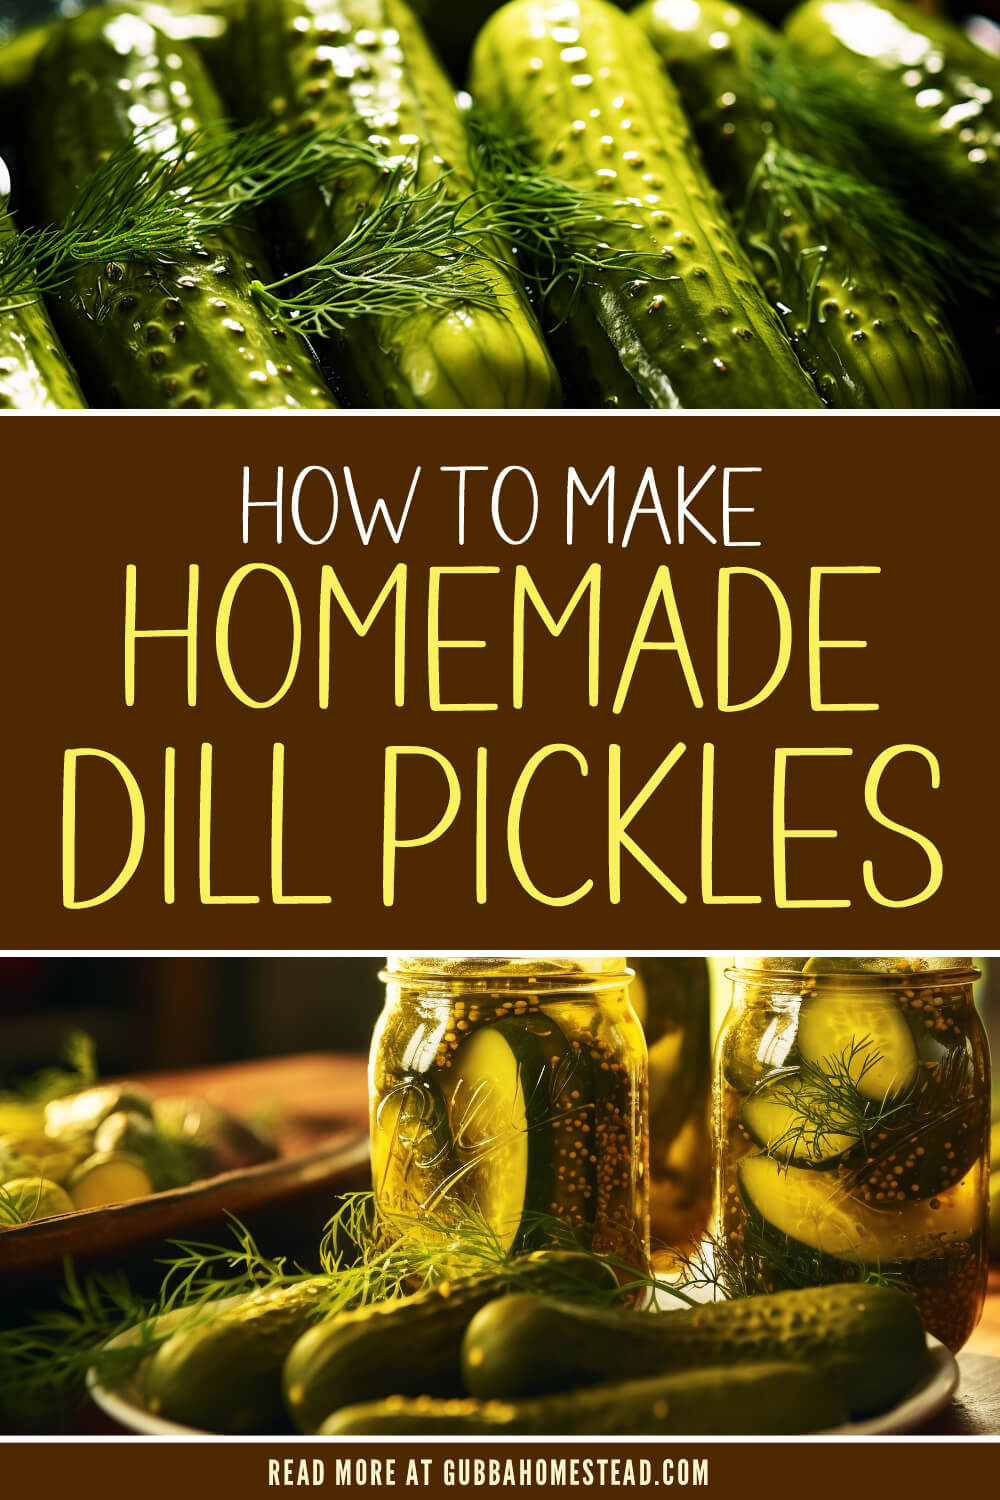 How To Make Homemade Dill Pickles